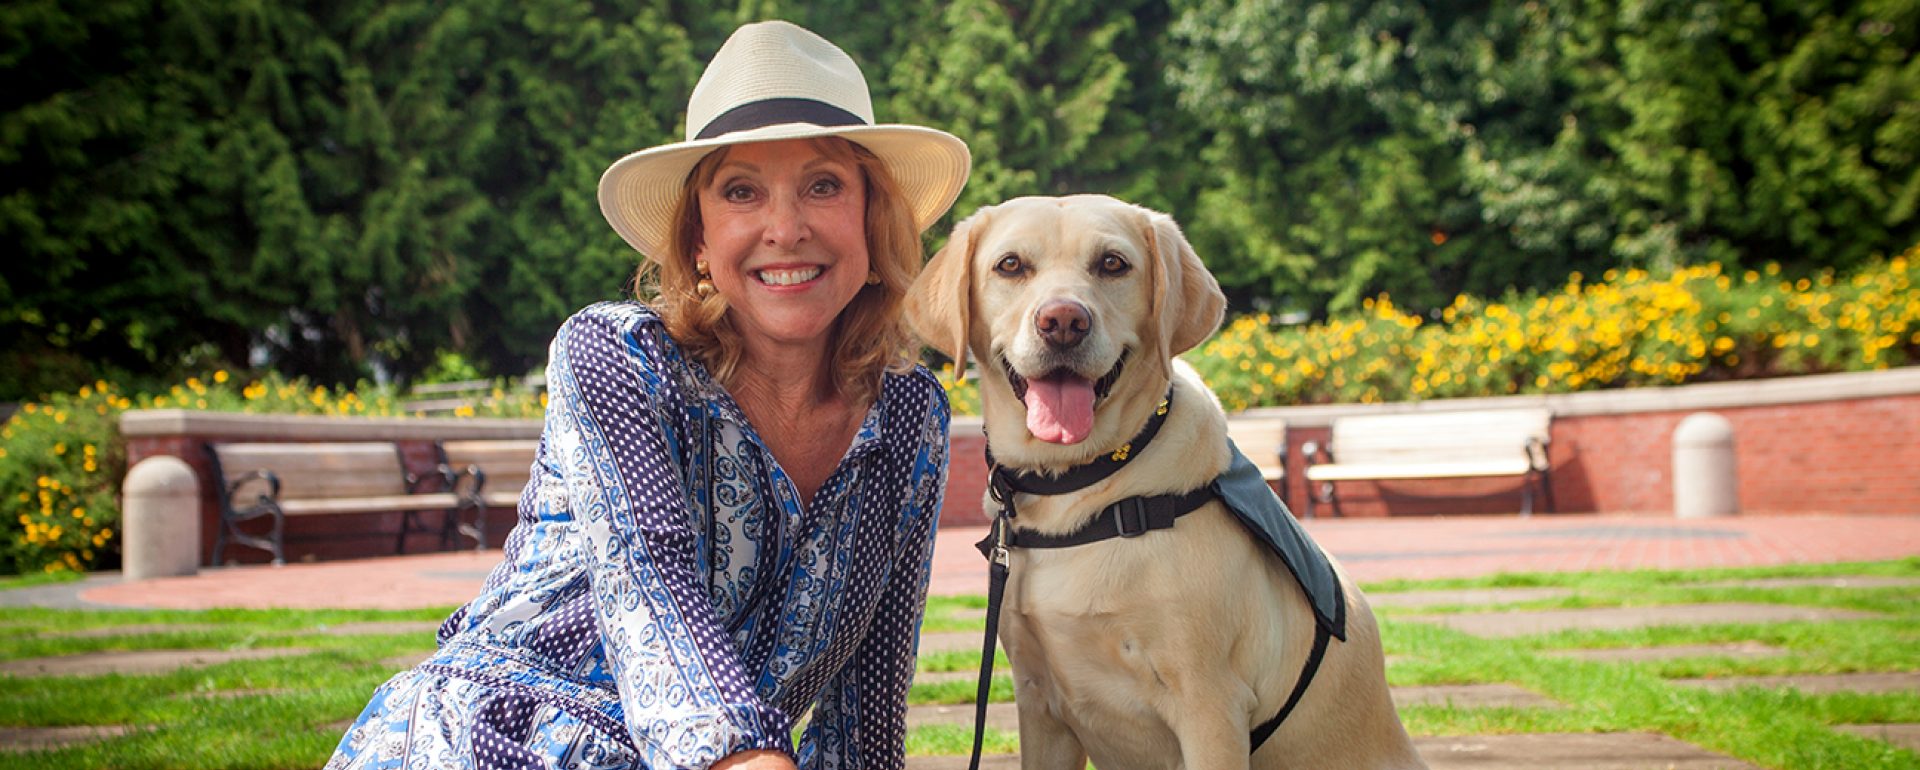 A woman wearing a hat smiles while sitting next to her yellow Lab career change dog